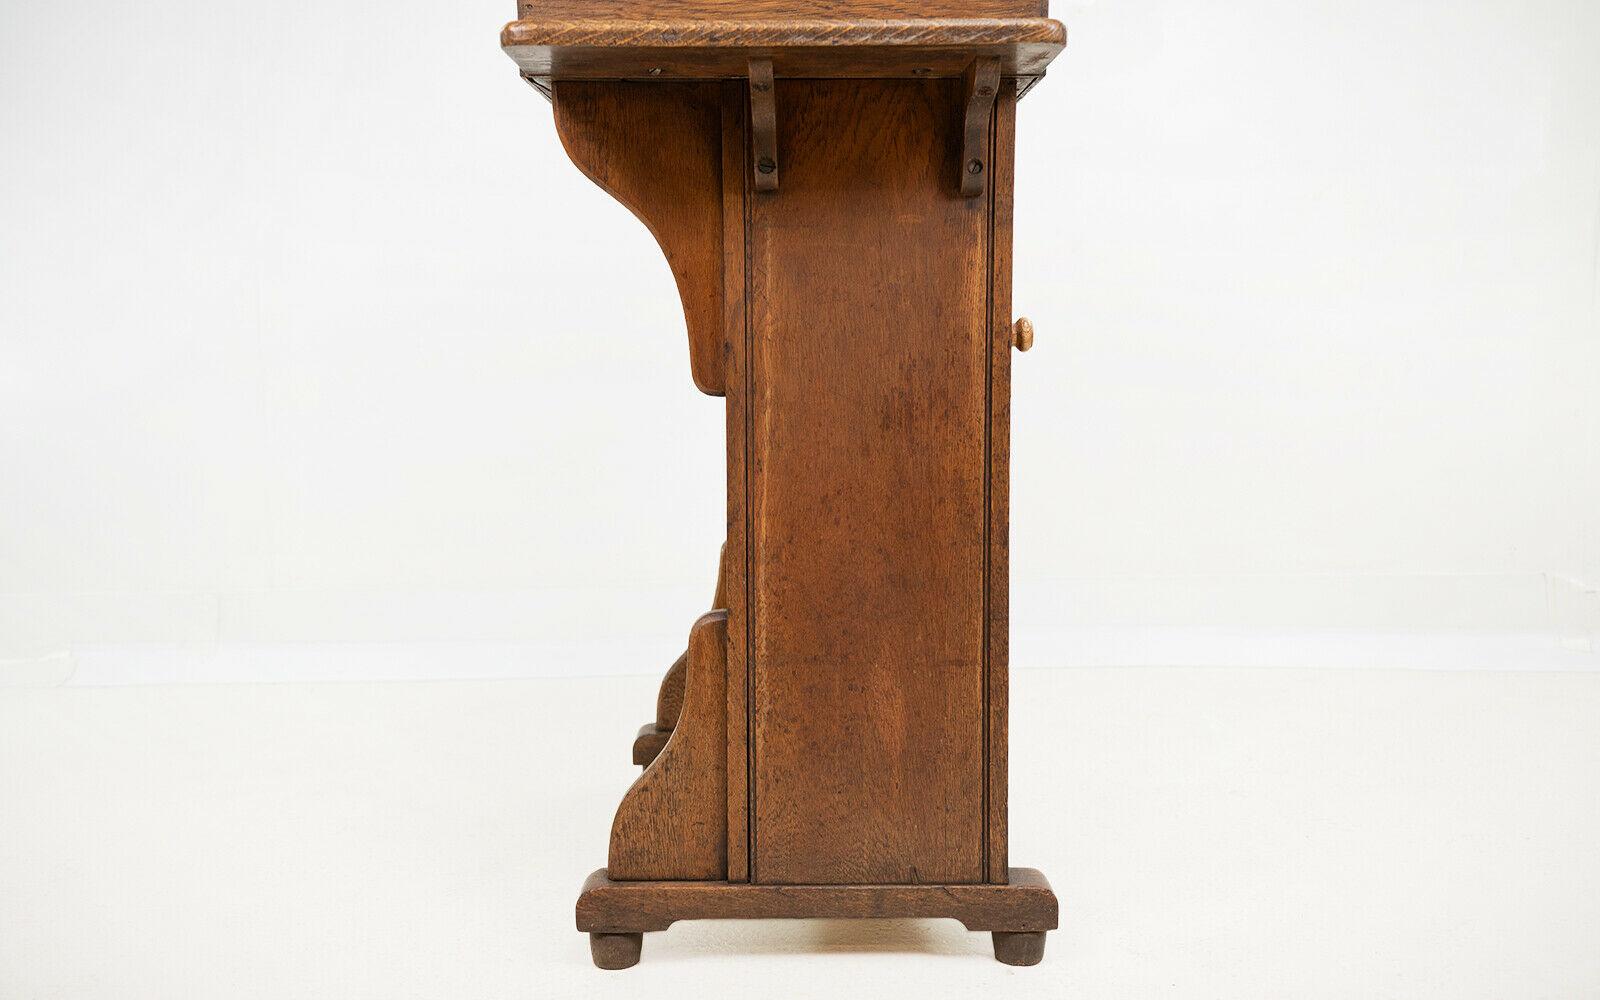 Teachers lectern

An early 20th century oak headteachers lectern. The podium has a flip-top desk with internal storage to the top and rear.

Featuring a single brass-capped ink well with the makers name present, made by the Bennet furnishing